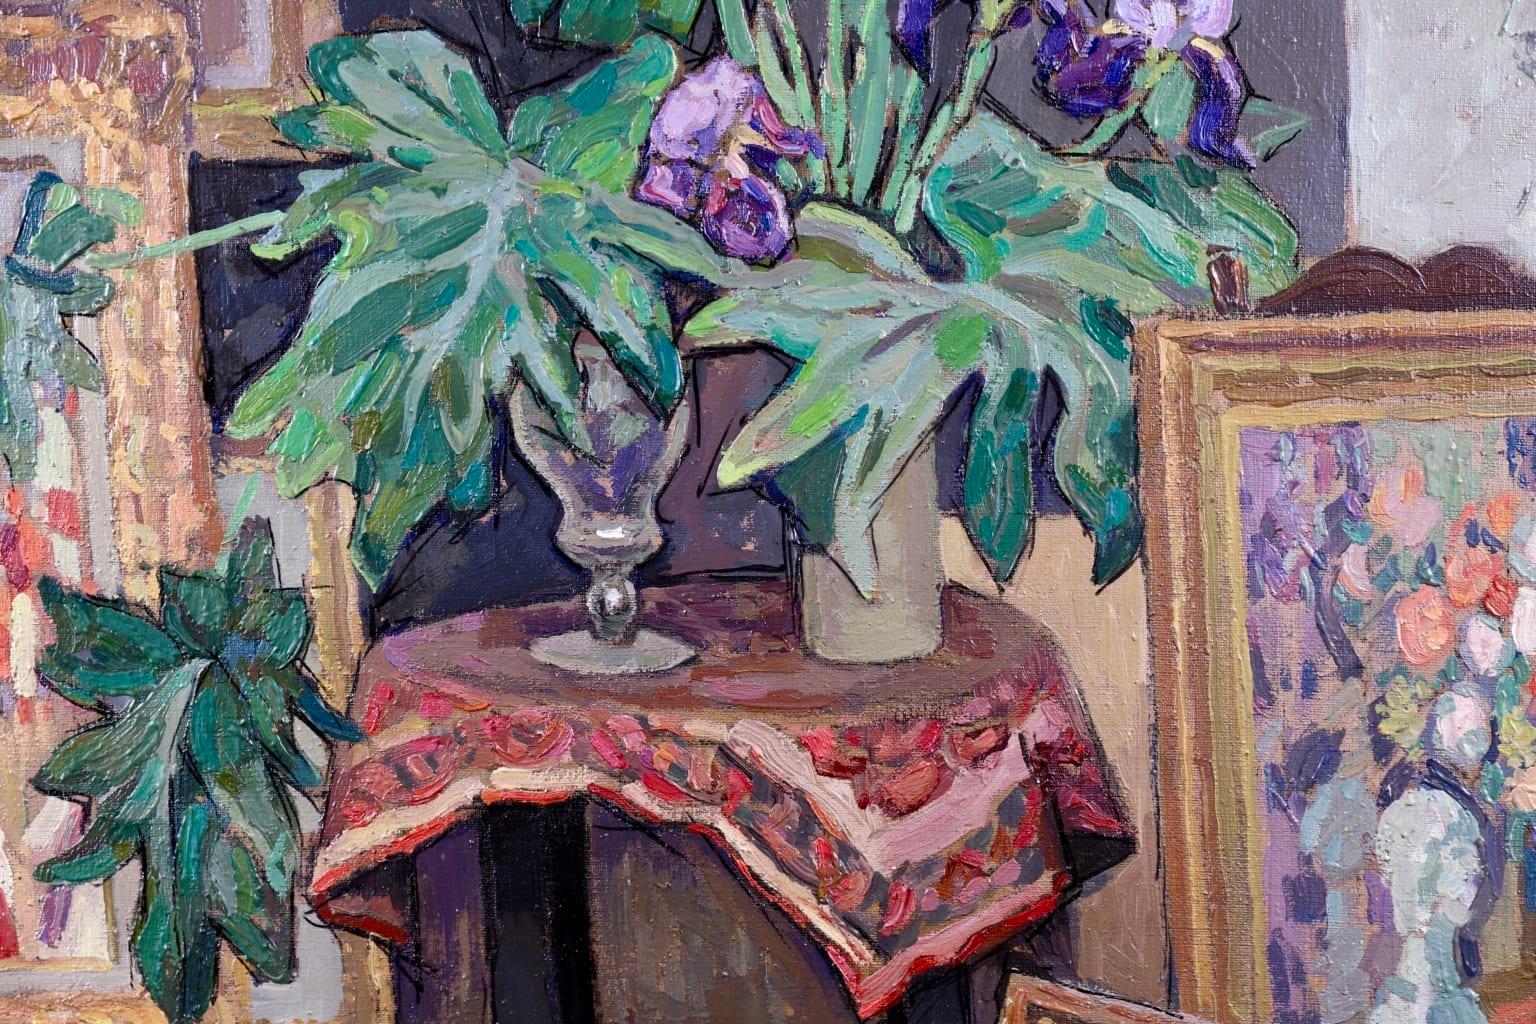 A wonderful oil on original canvas circa 1930 by French post-impressionist painter Jacques Martin-Ferrieres depicting a view of the artist's study. There is a wooden table set on the patterned rug, on top of which is a vase of purple and red &